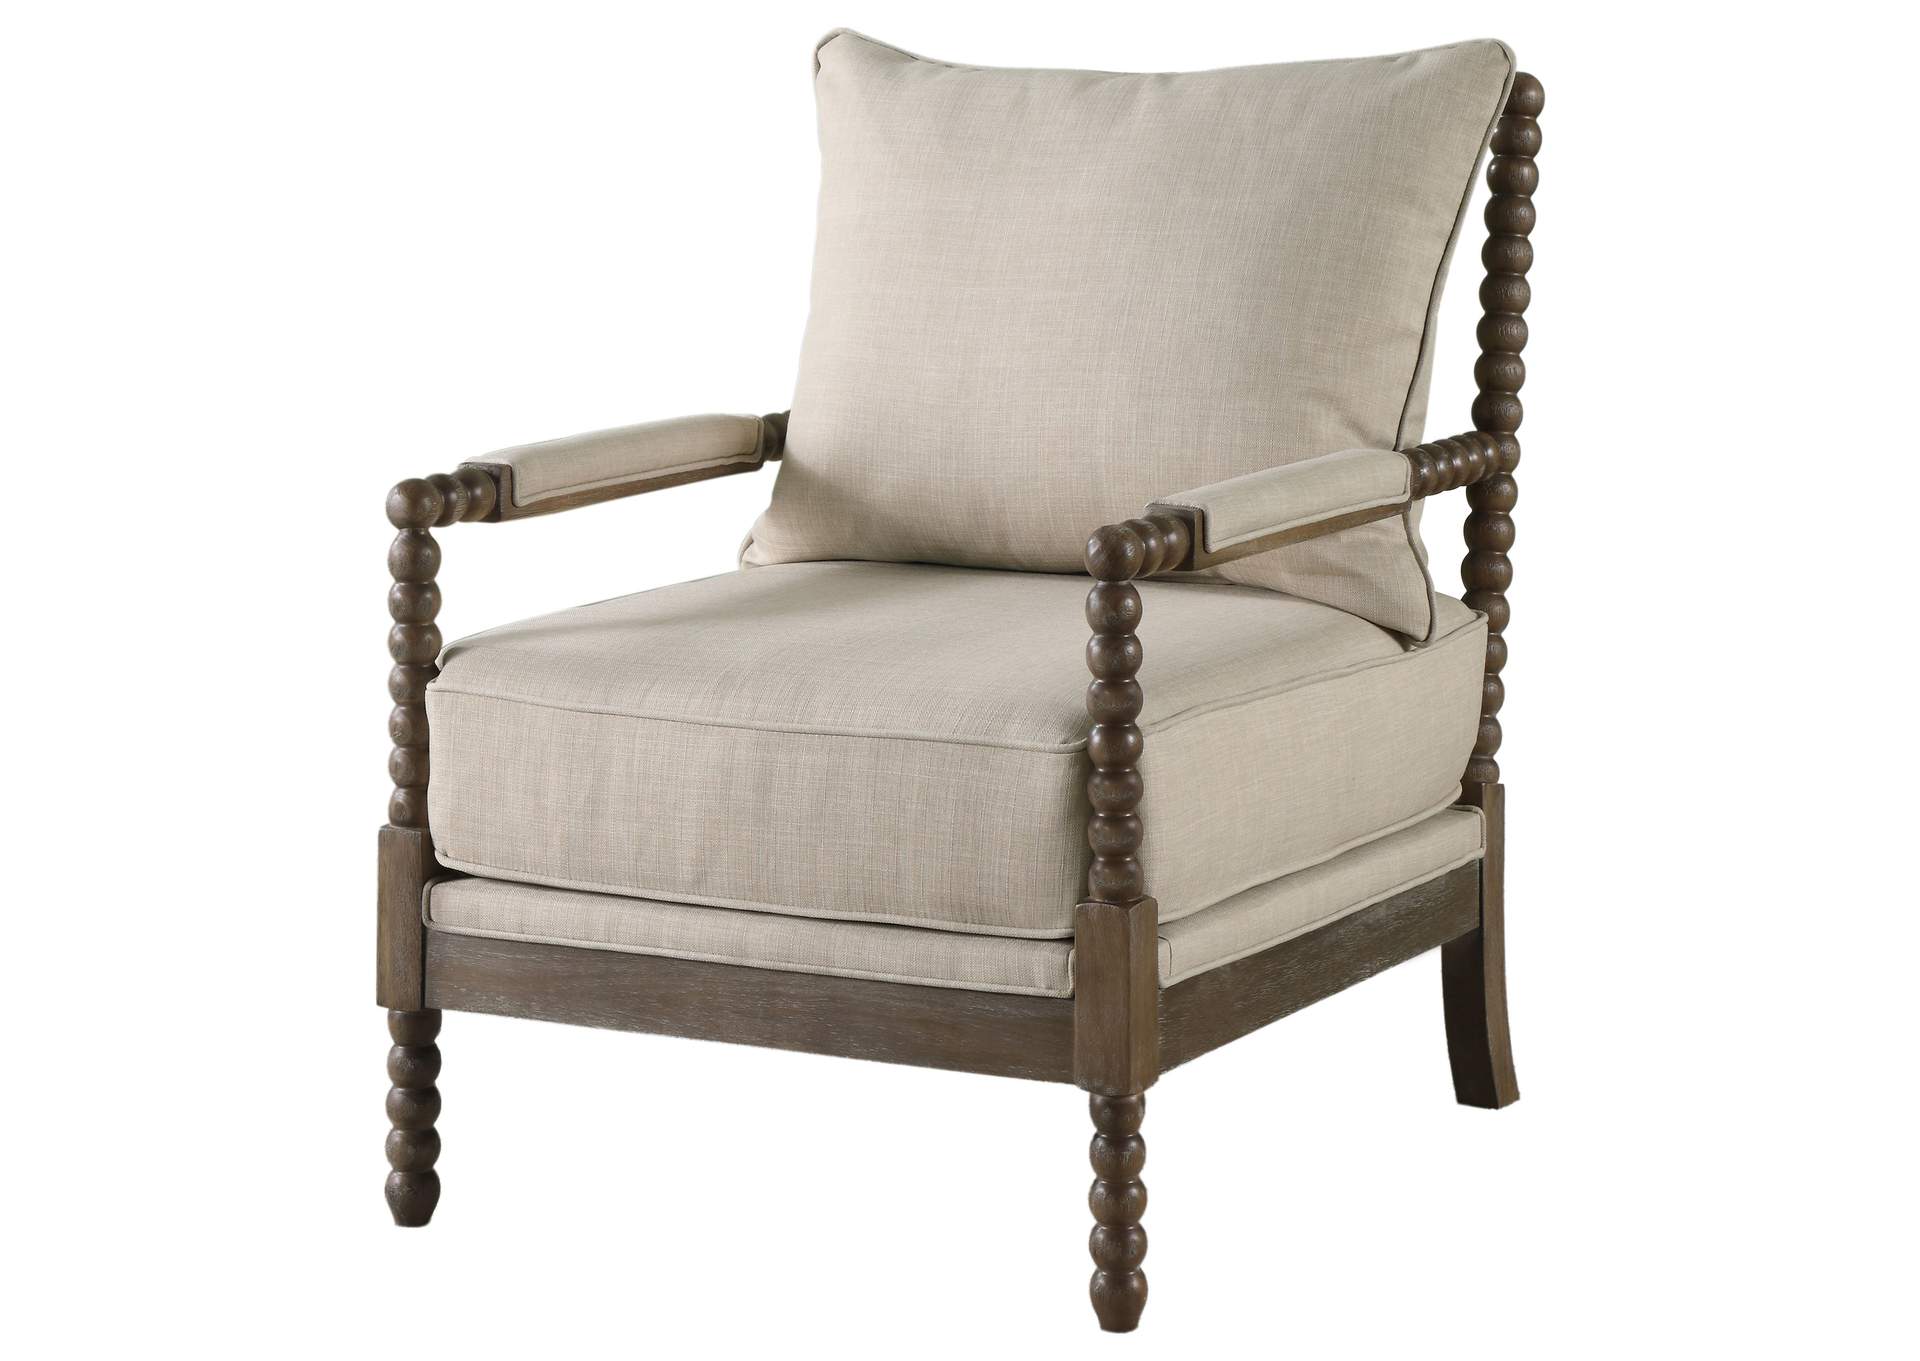 Blanchett Cushion Back Accent Chair Beige and Natural,Coaster Furniture